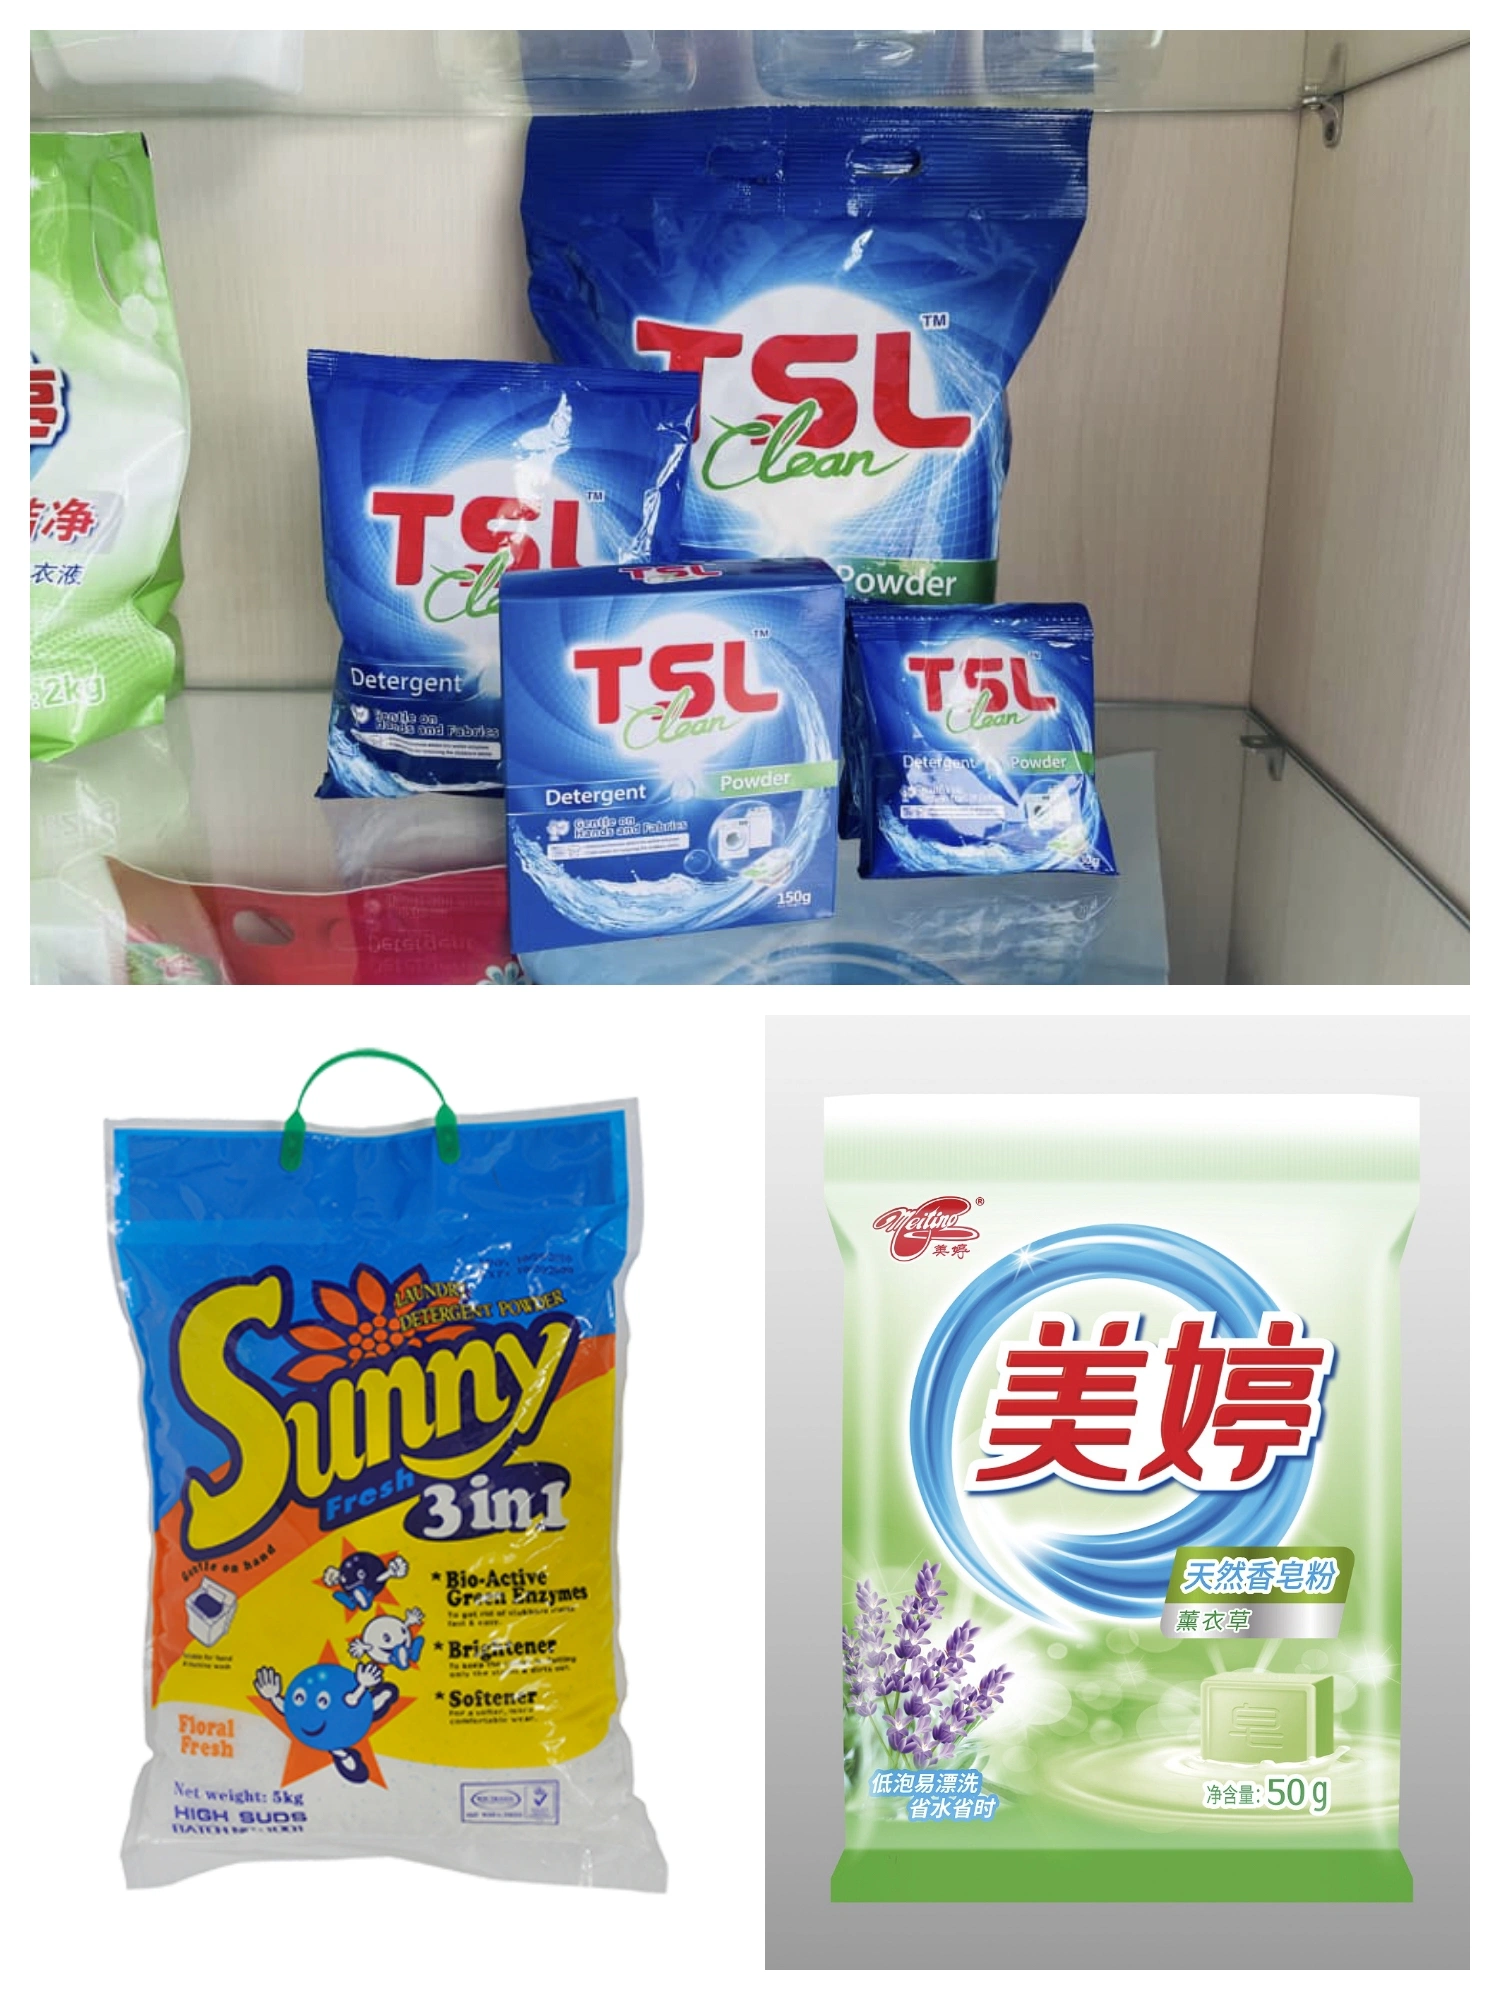 OEM Hot Sale Detergent Powder Laundry Detergent Daily Cleaning Product for Both Hand Wash and Washing Machine Wash